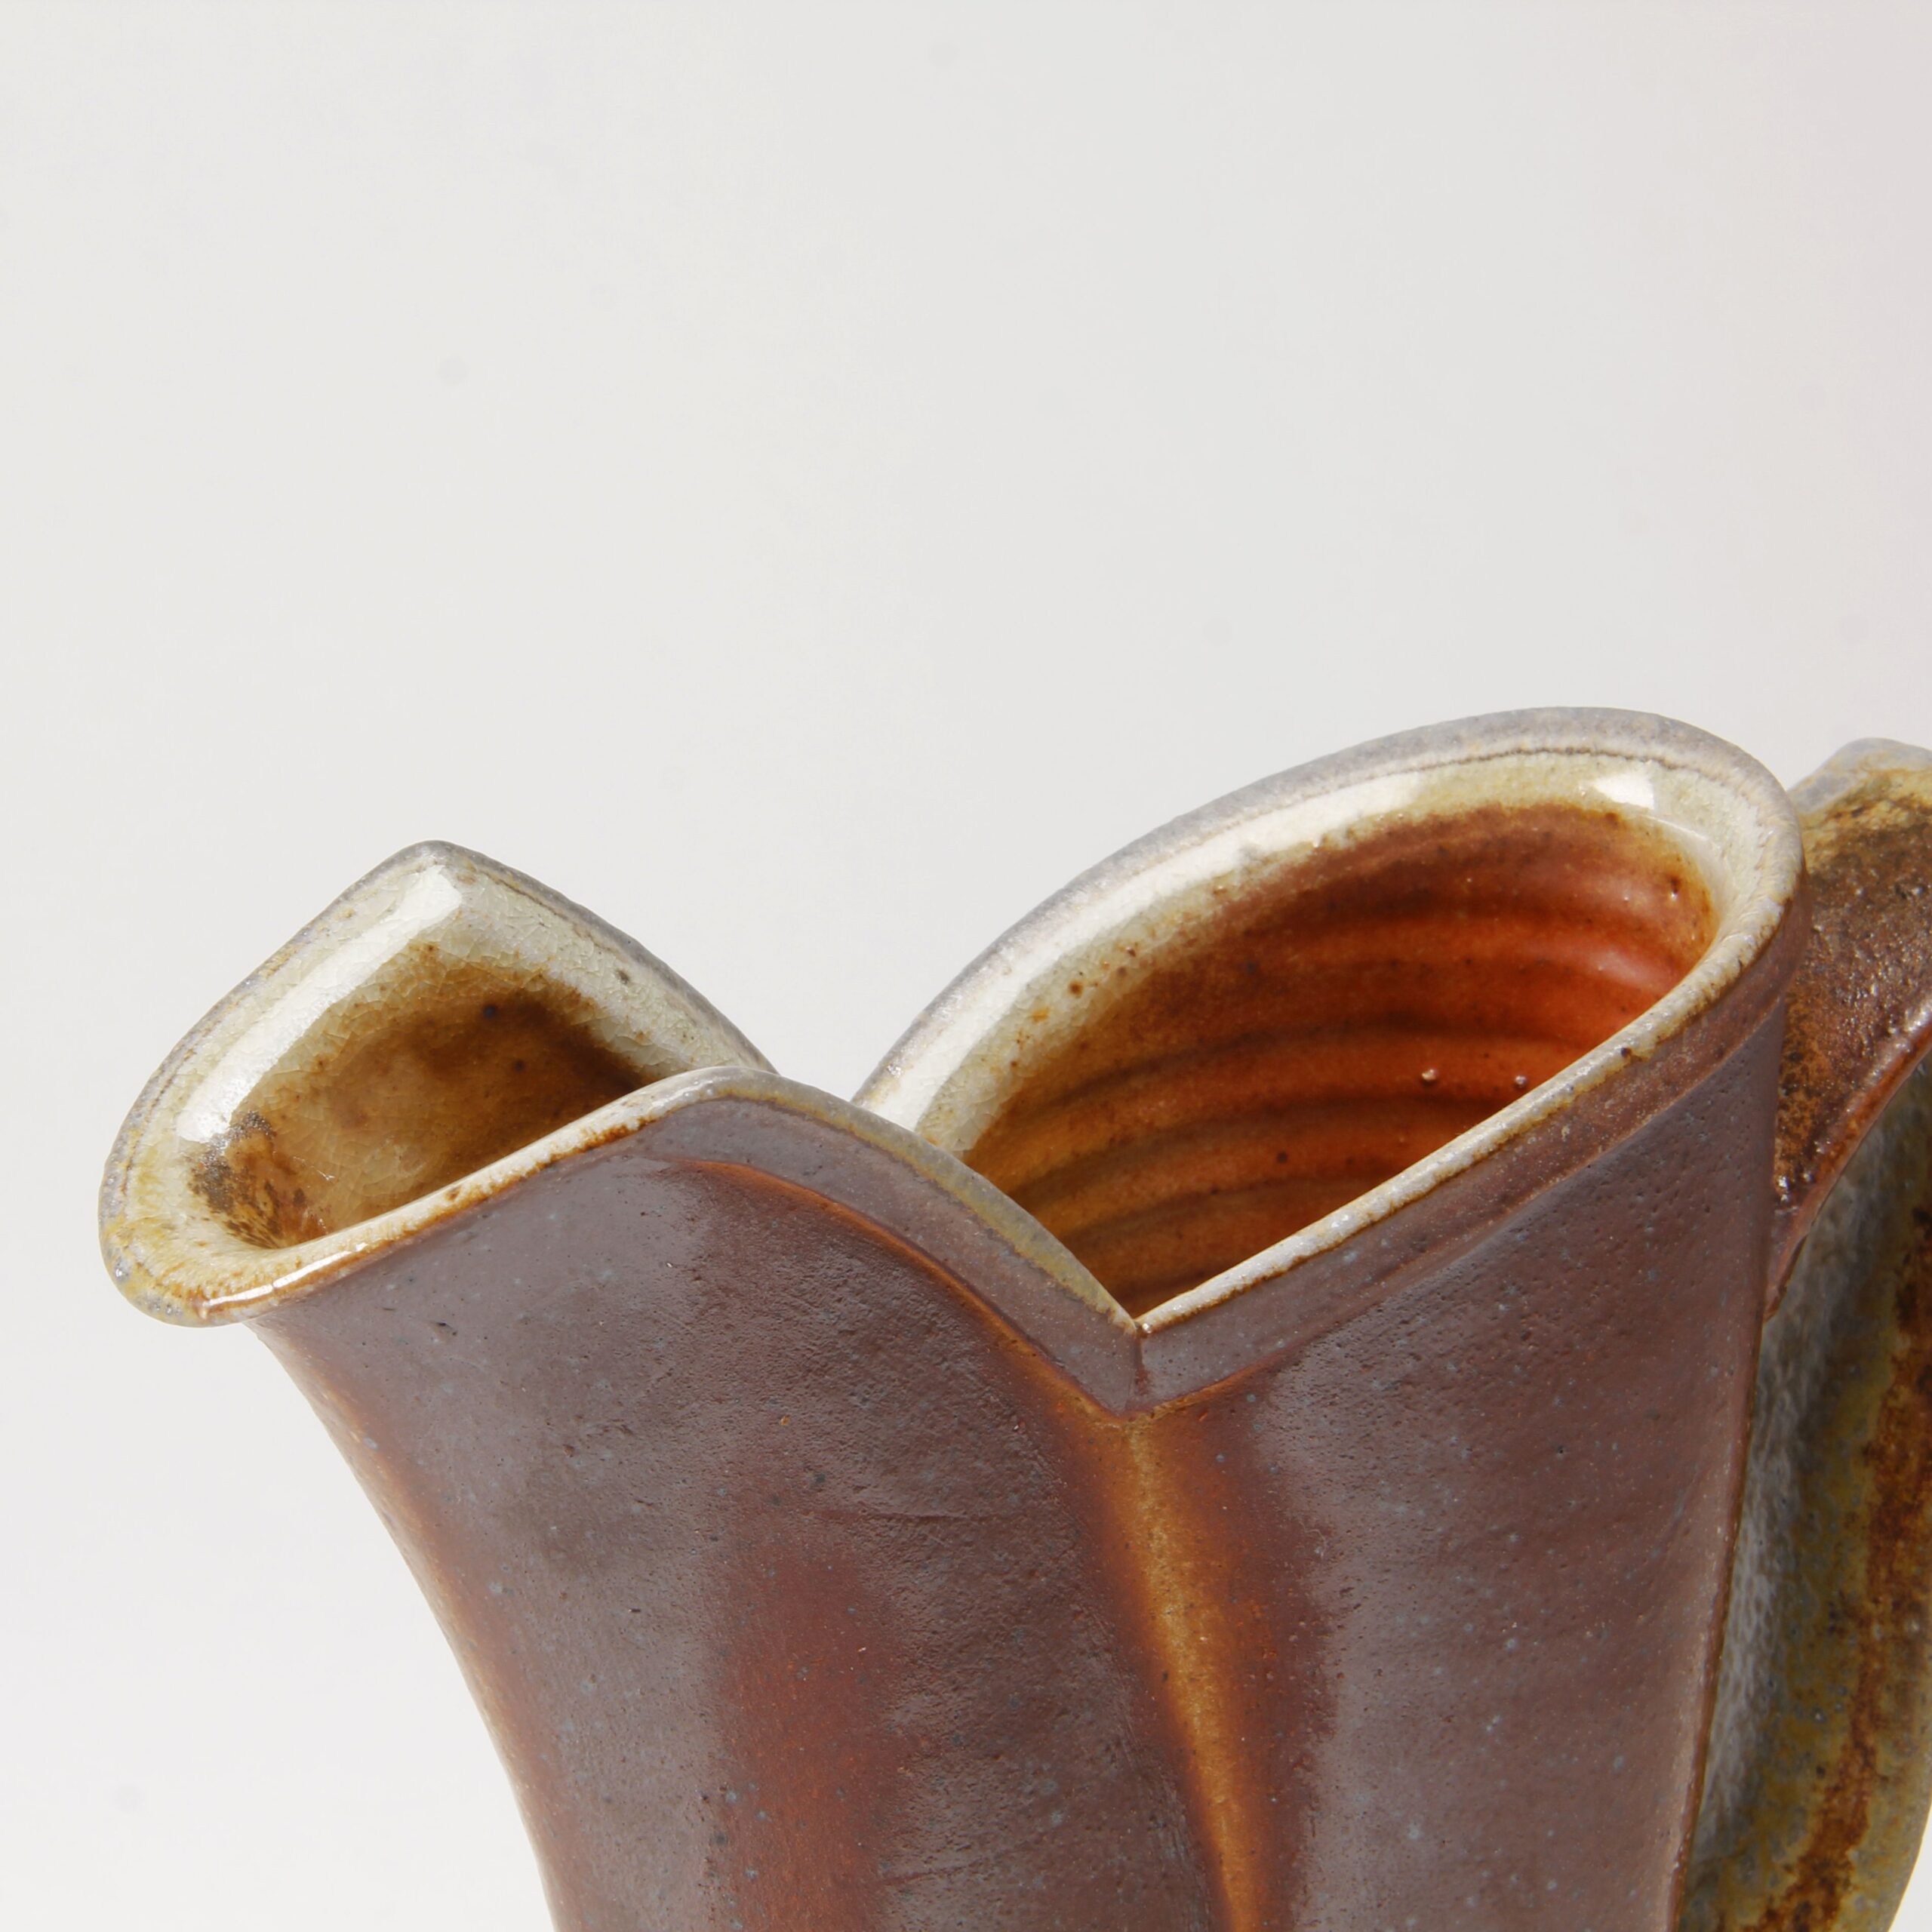 Bruce Cochrane: Rust Pitcher Product Image 4 of 5